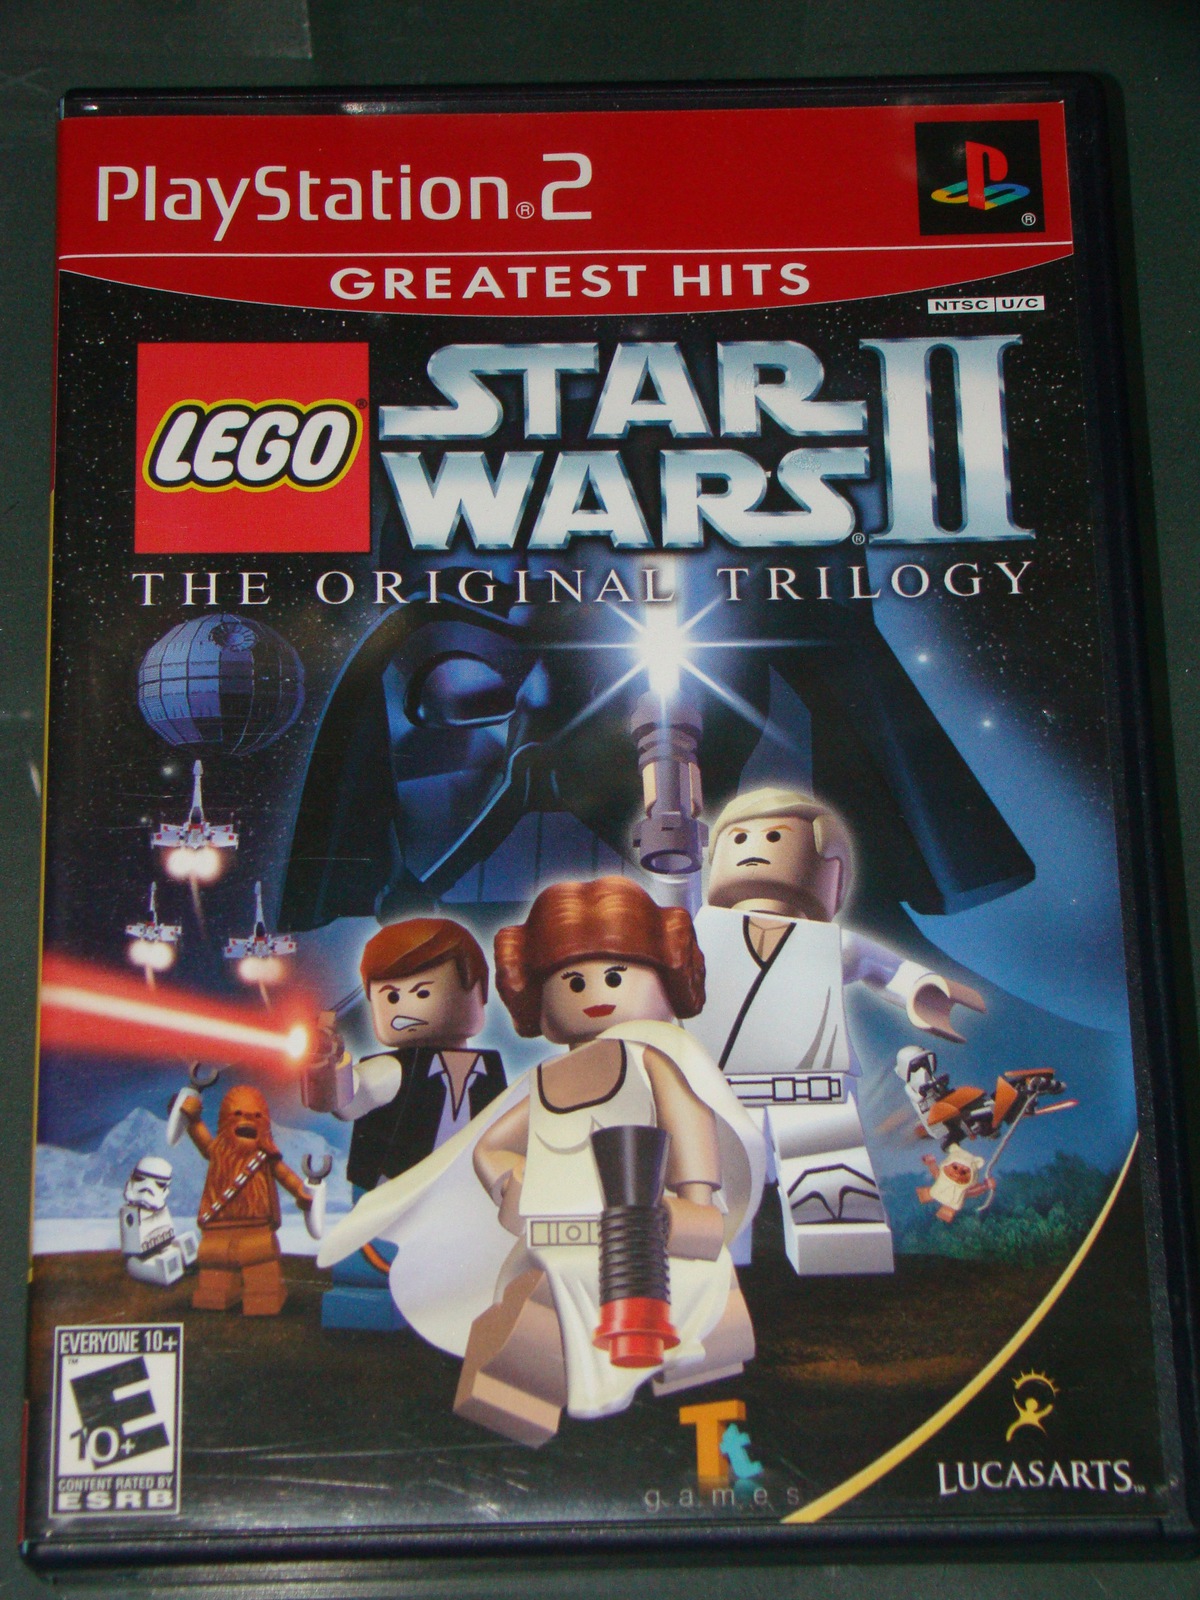 Playstation 2 - LEGO STAR WARS II - THE ORIGINAL TRILOGY (Complete with Manual) - $18.00